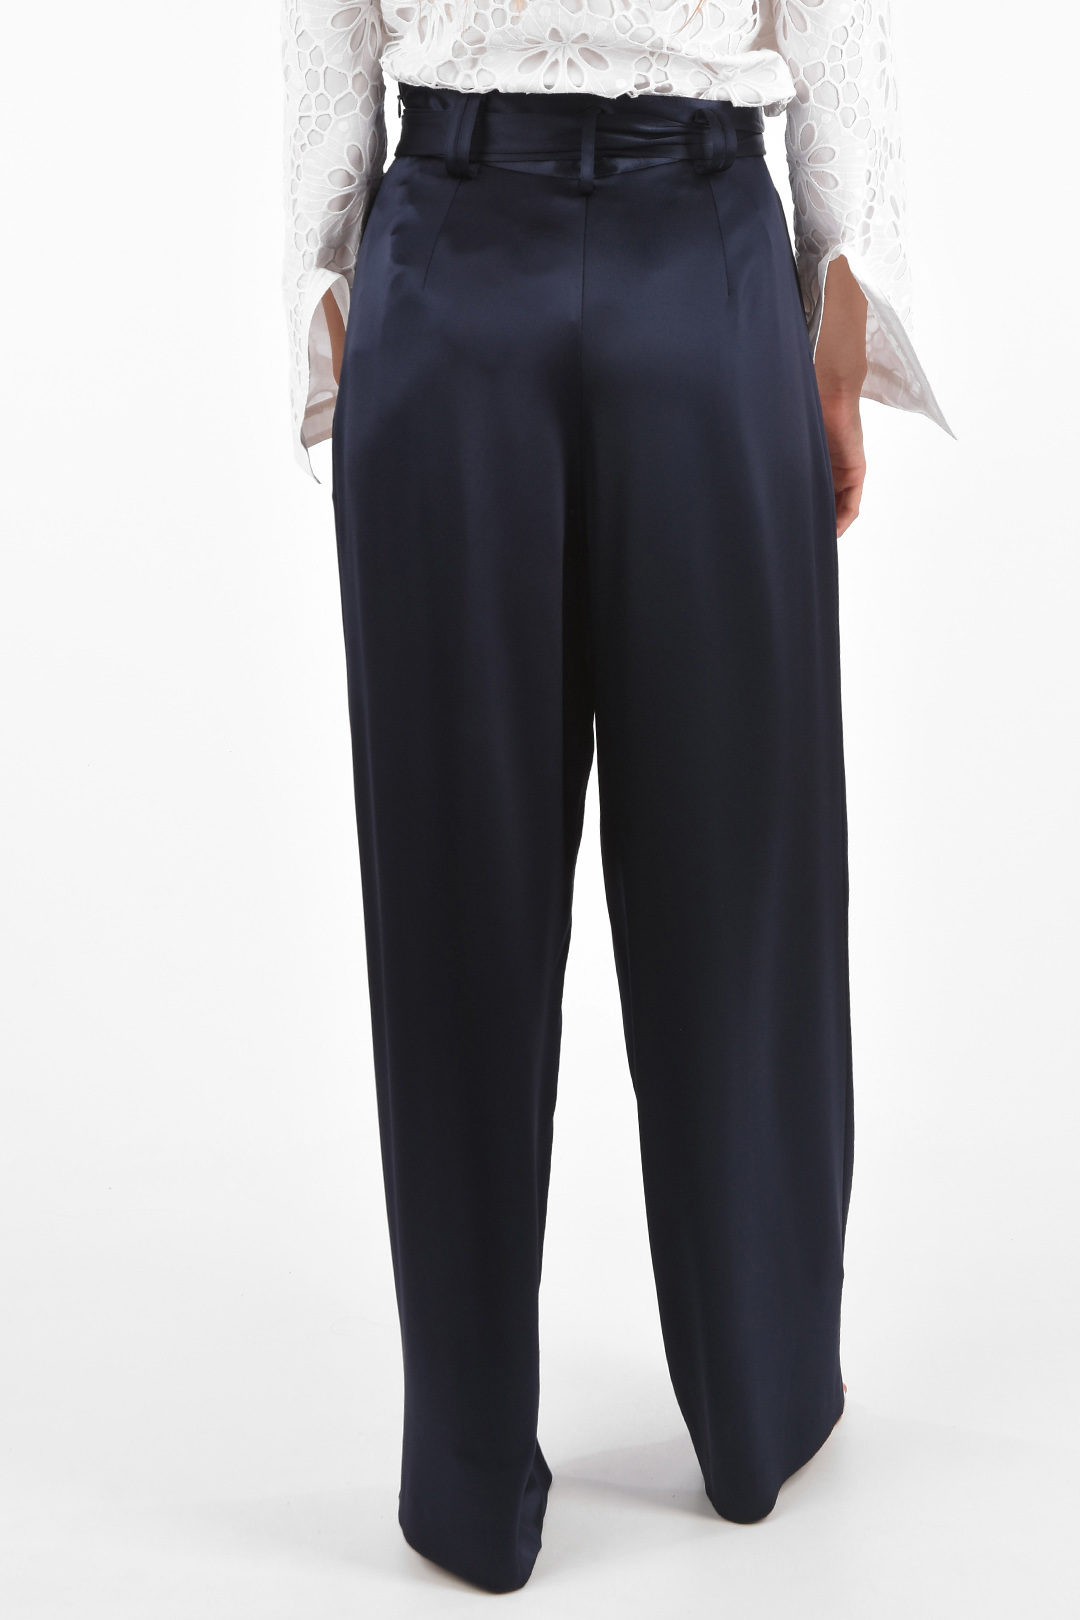 Tory Burch satin high-rise waist palazzo pants with belt women - Glamood  Outlet